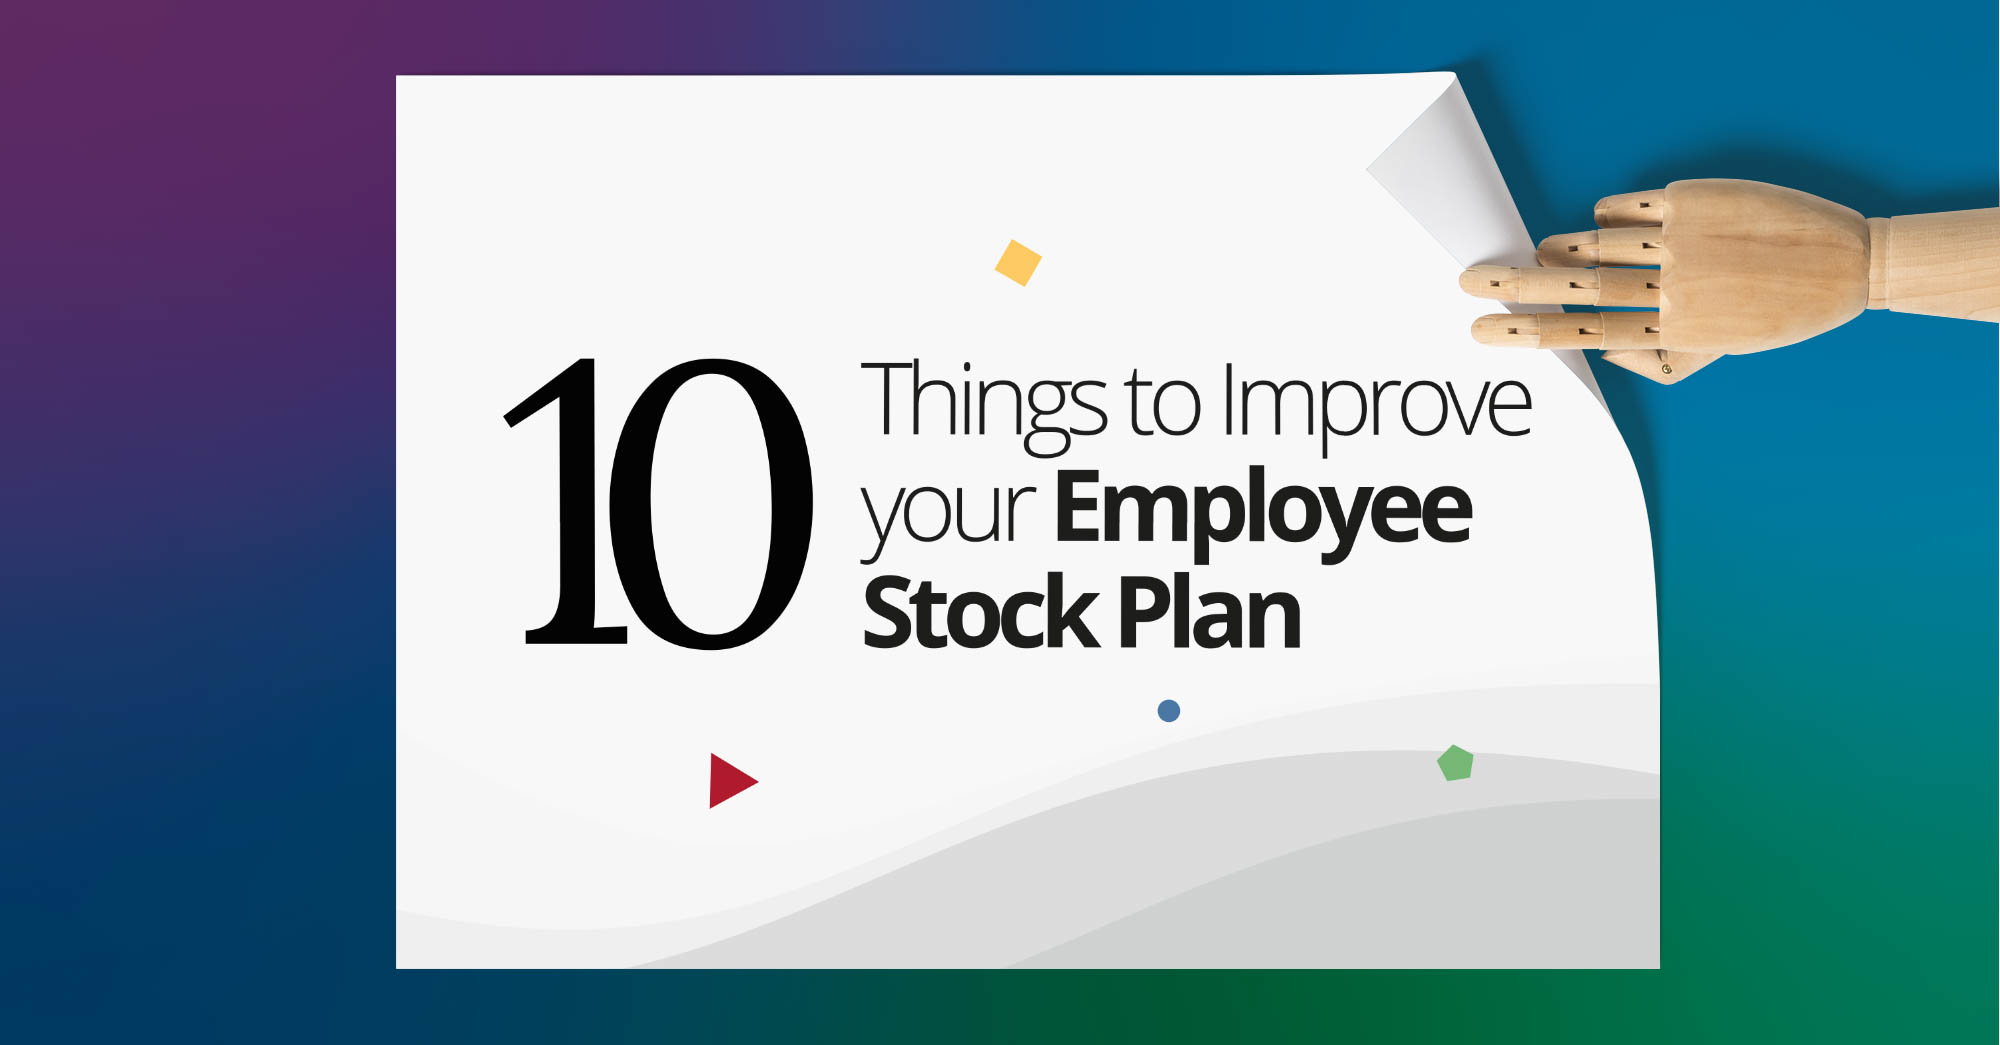 10 things you can do to improve your employee stock plan